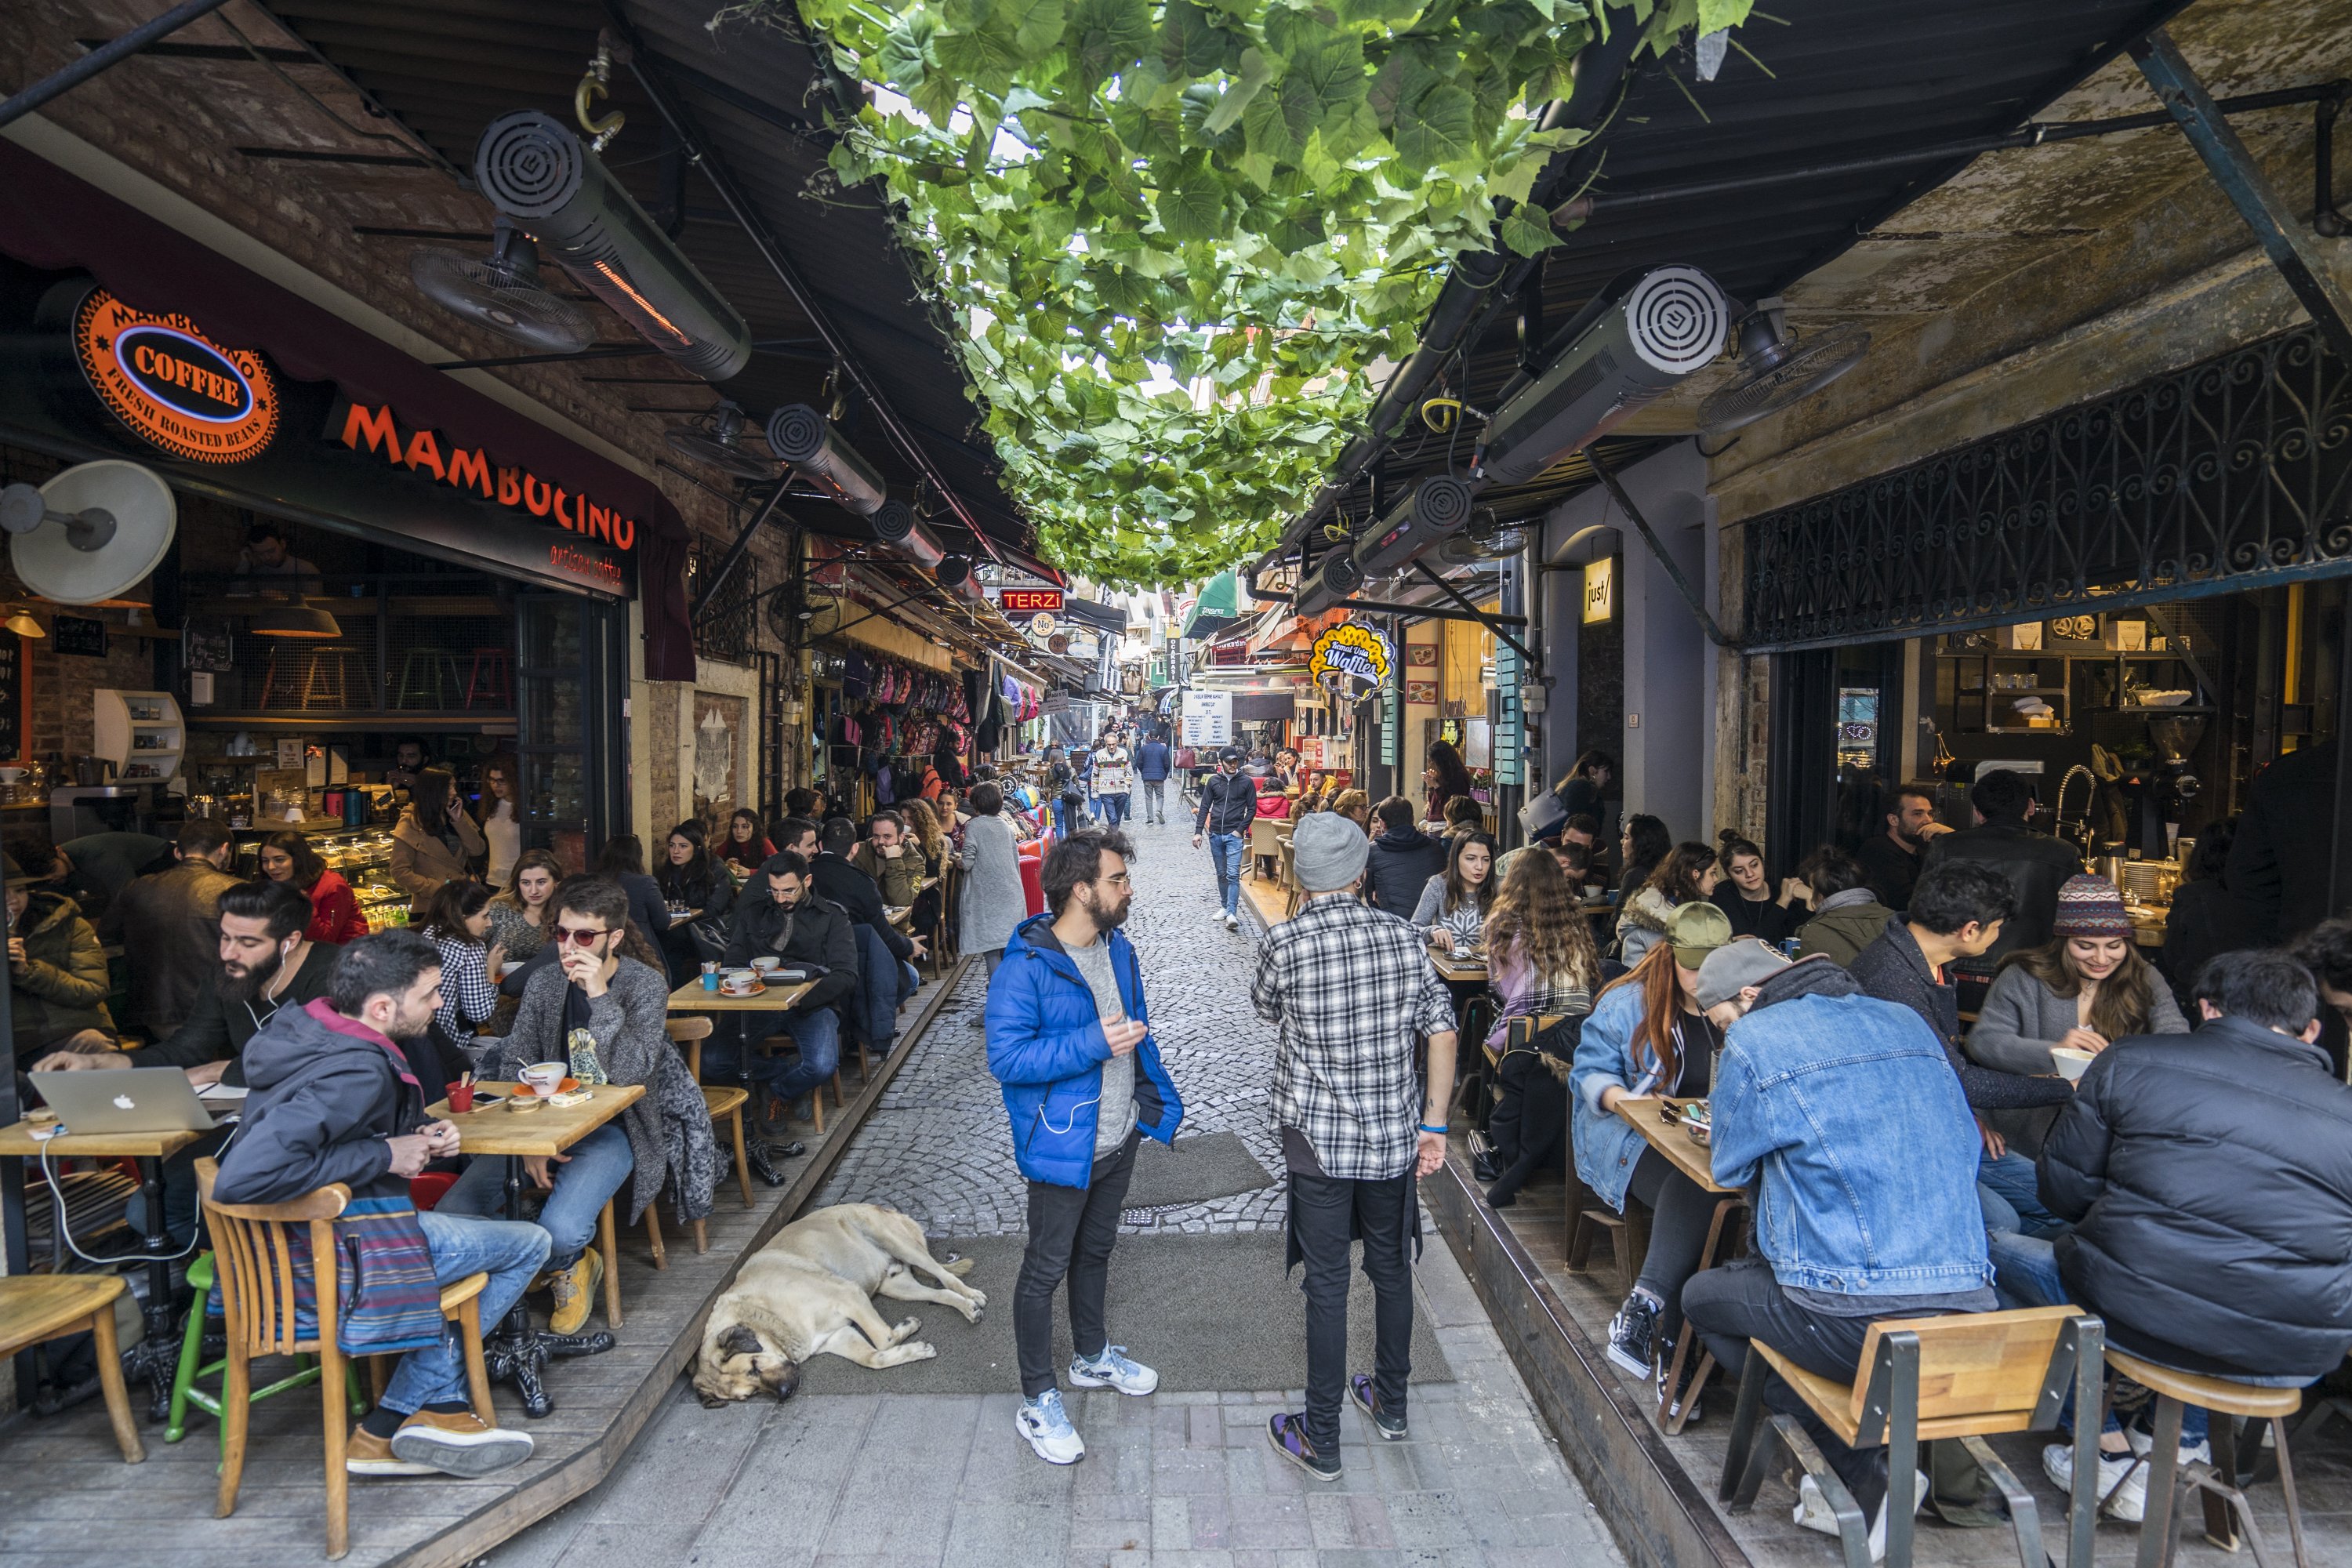 How much does eating outside in Istanbul cost each day if I eat